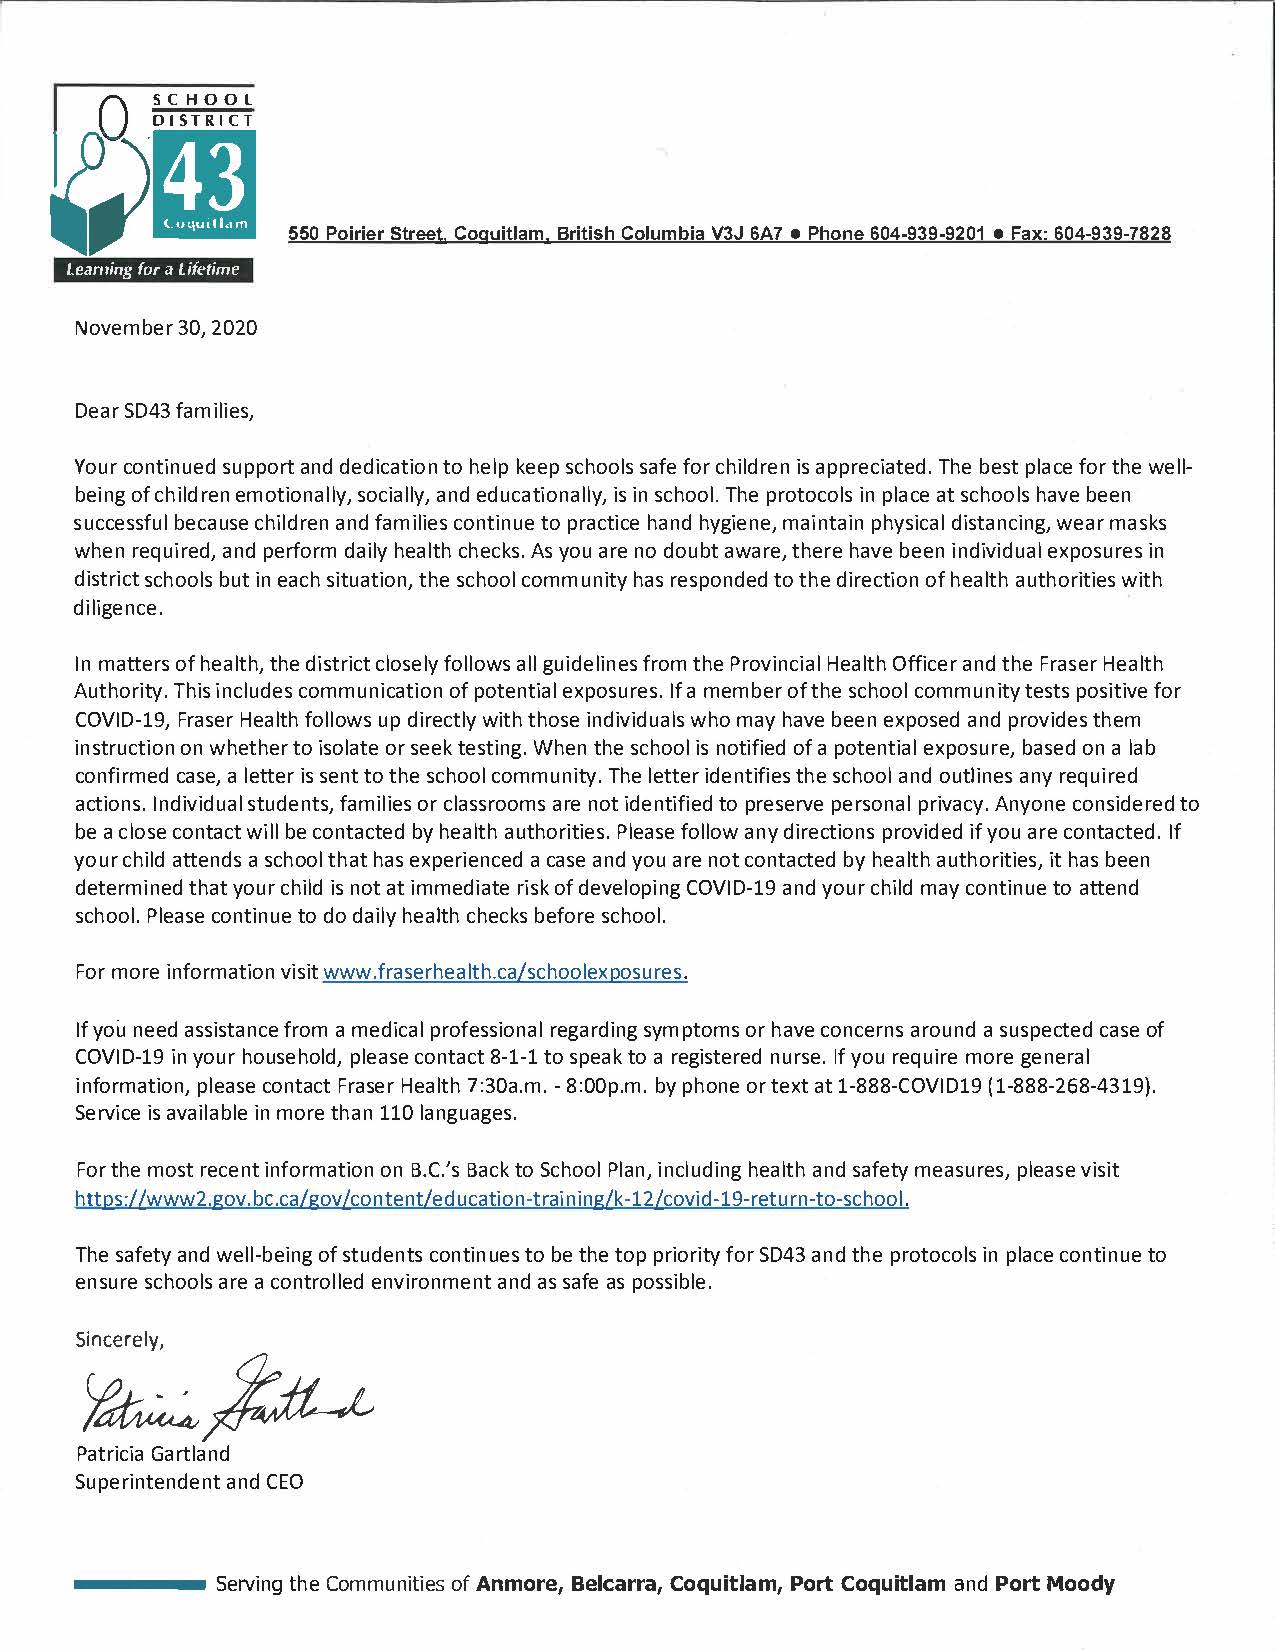 Superintendent's Letter to Families - COVID-19  Update 11-30-2020.jpg